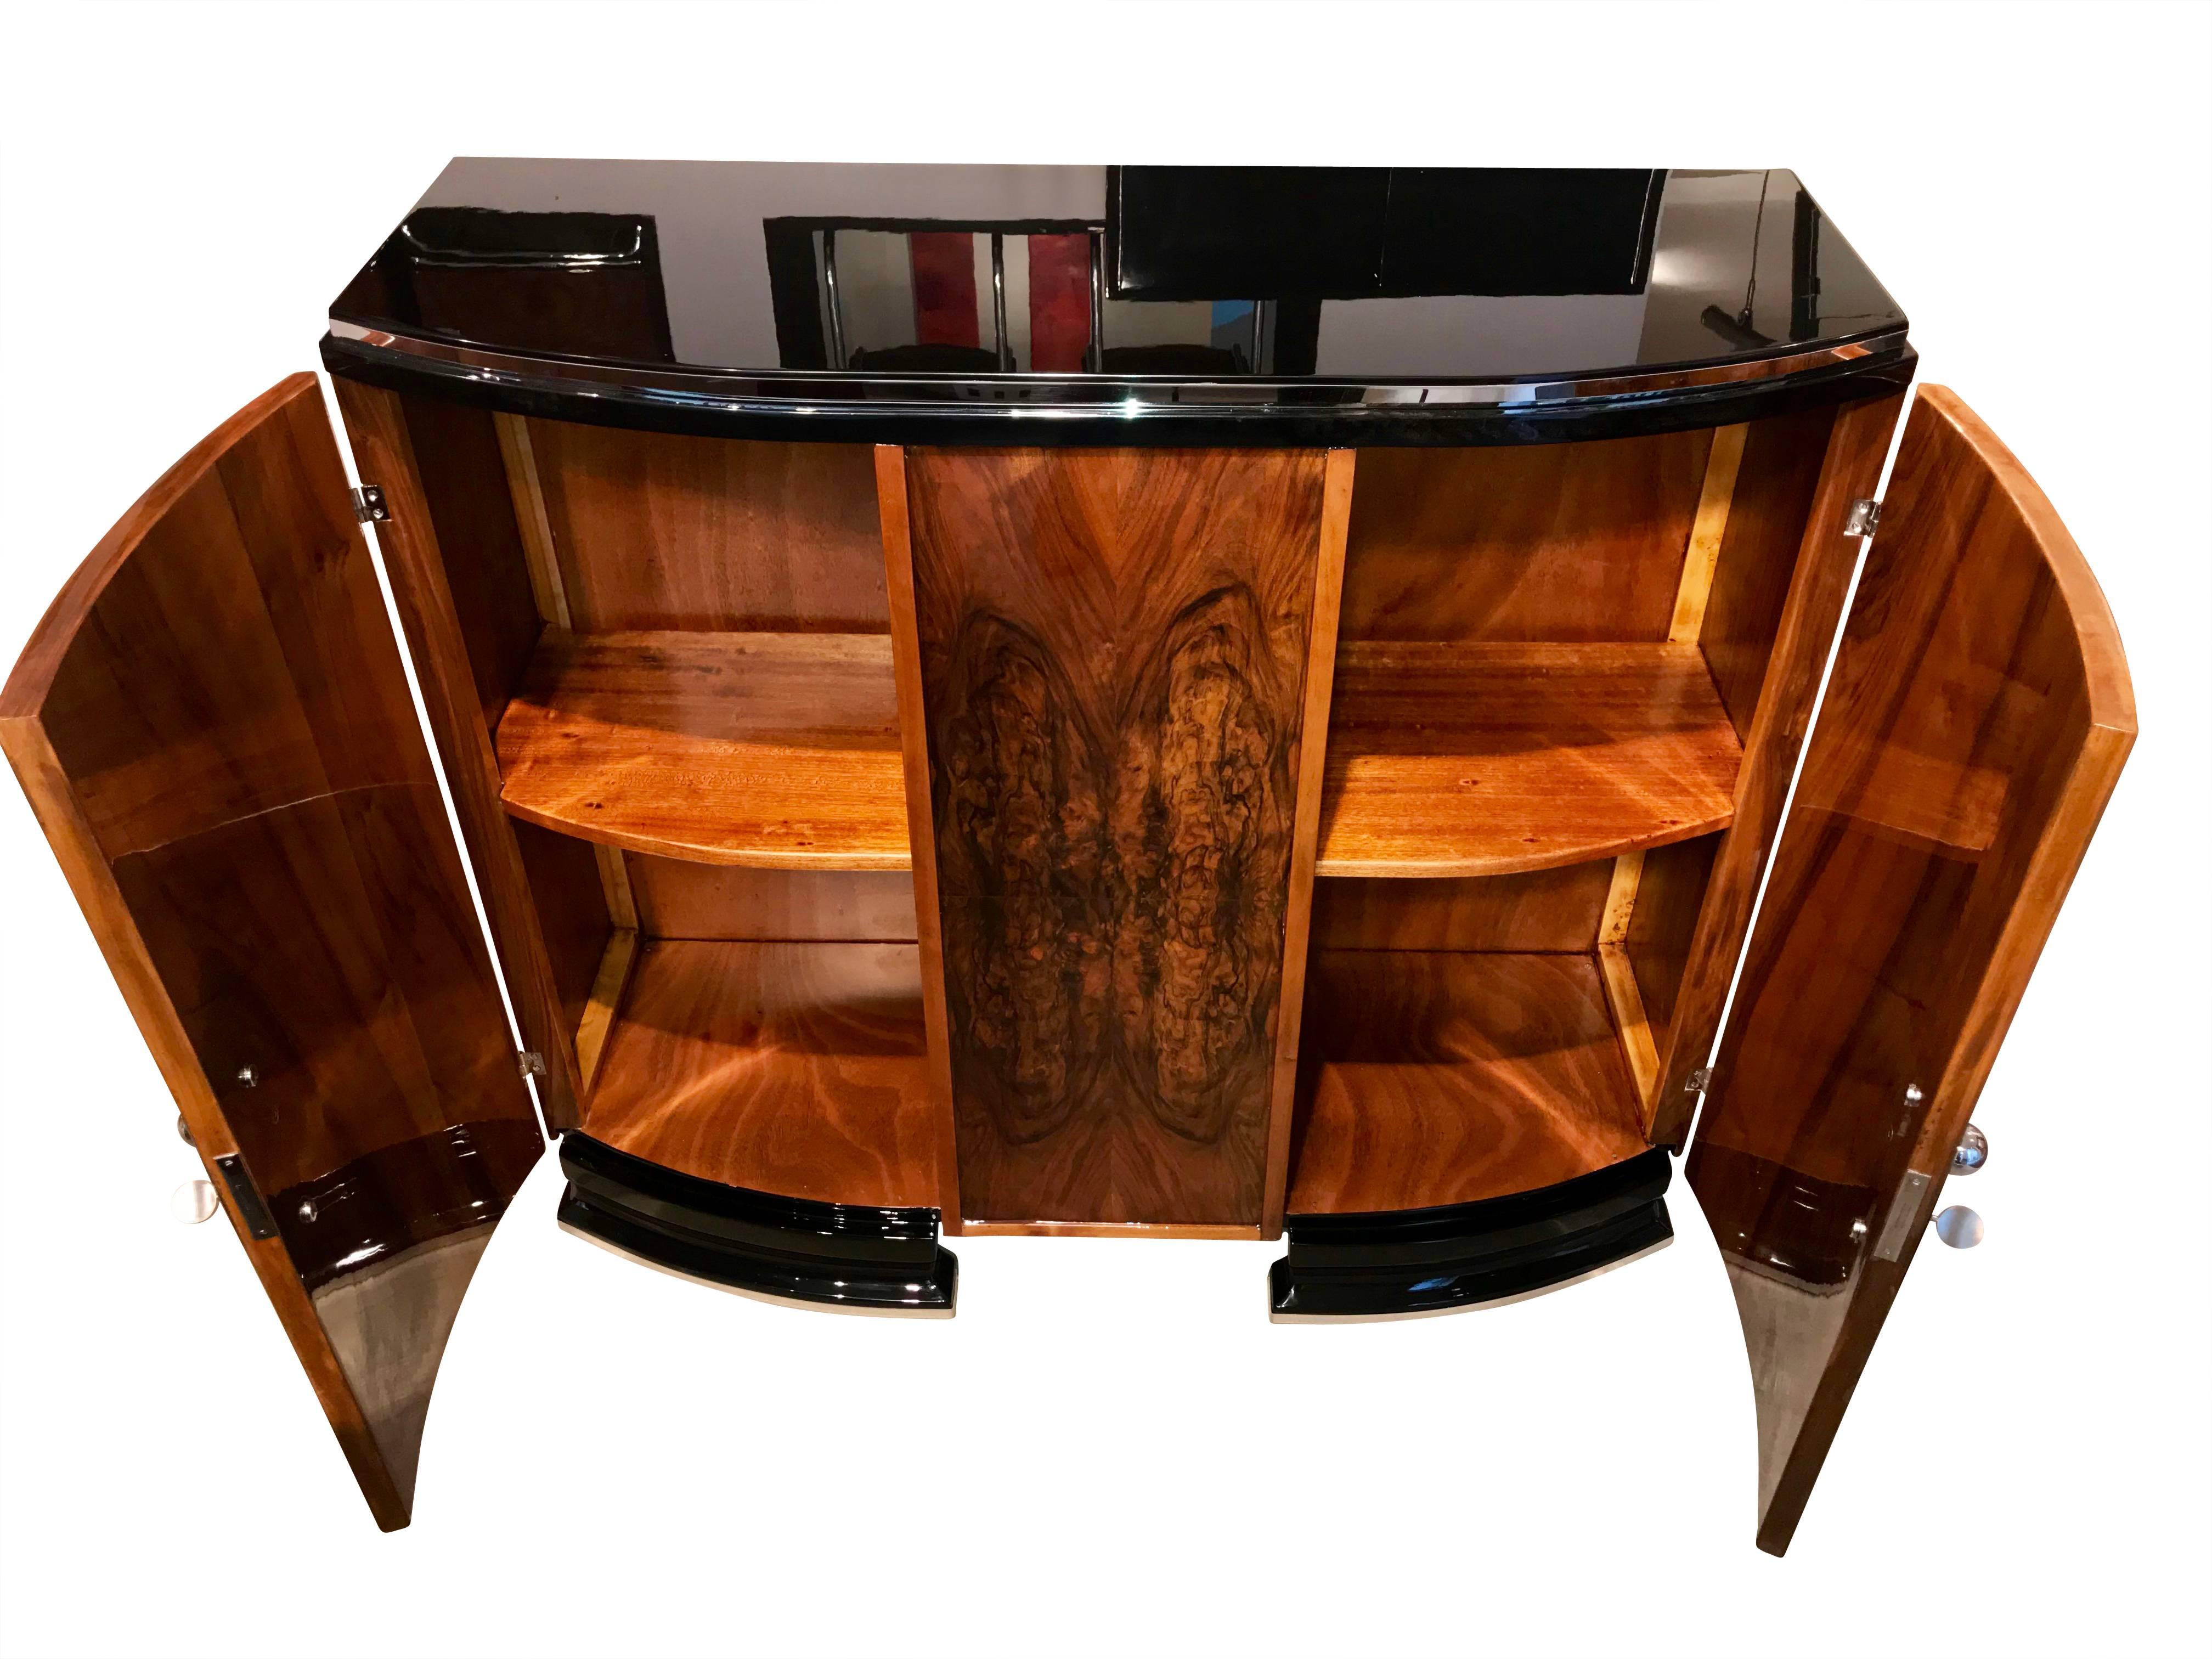 French Small Art Deco Sideboard, Walnut Veneer, Chrome and Black Parts, France, 1930s